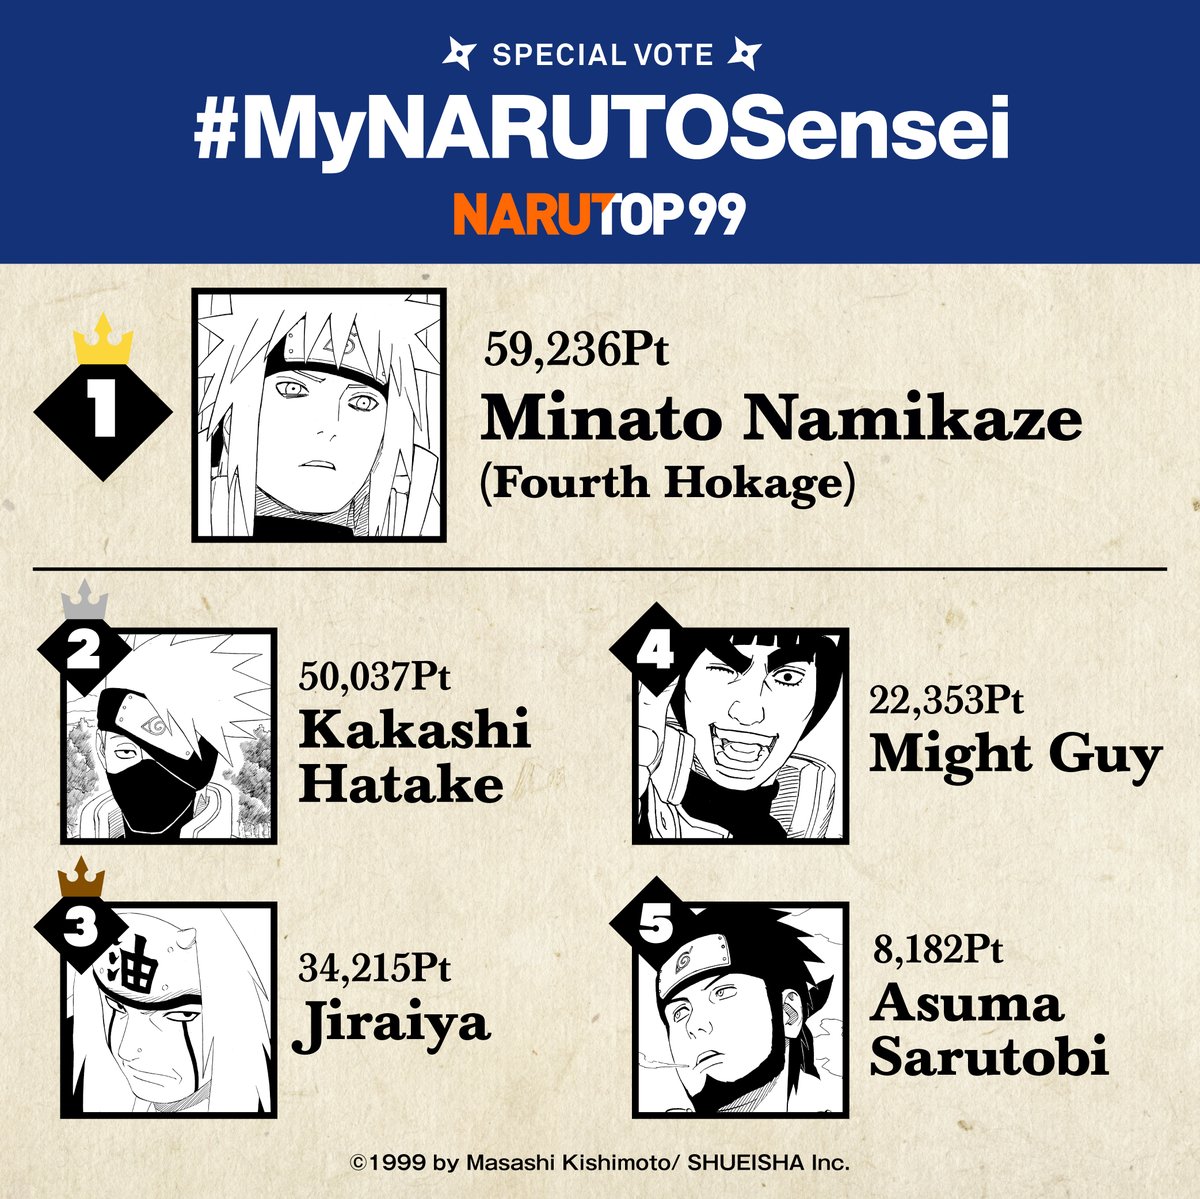 [#NARUTOP99 Special Vote]
Here's the results from the second part of the Special Vote, #MyNARUTOSensei!

After a total of 174,023 votes, the sensei that came out on top was...
#MinatoNamikaze_FourthHokage!